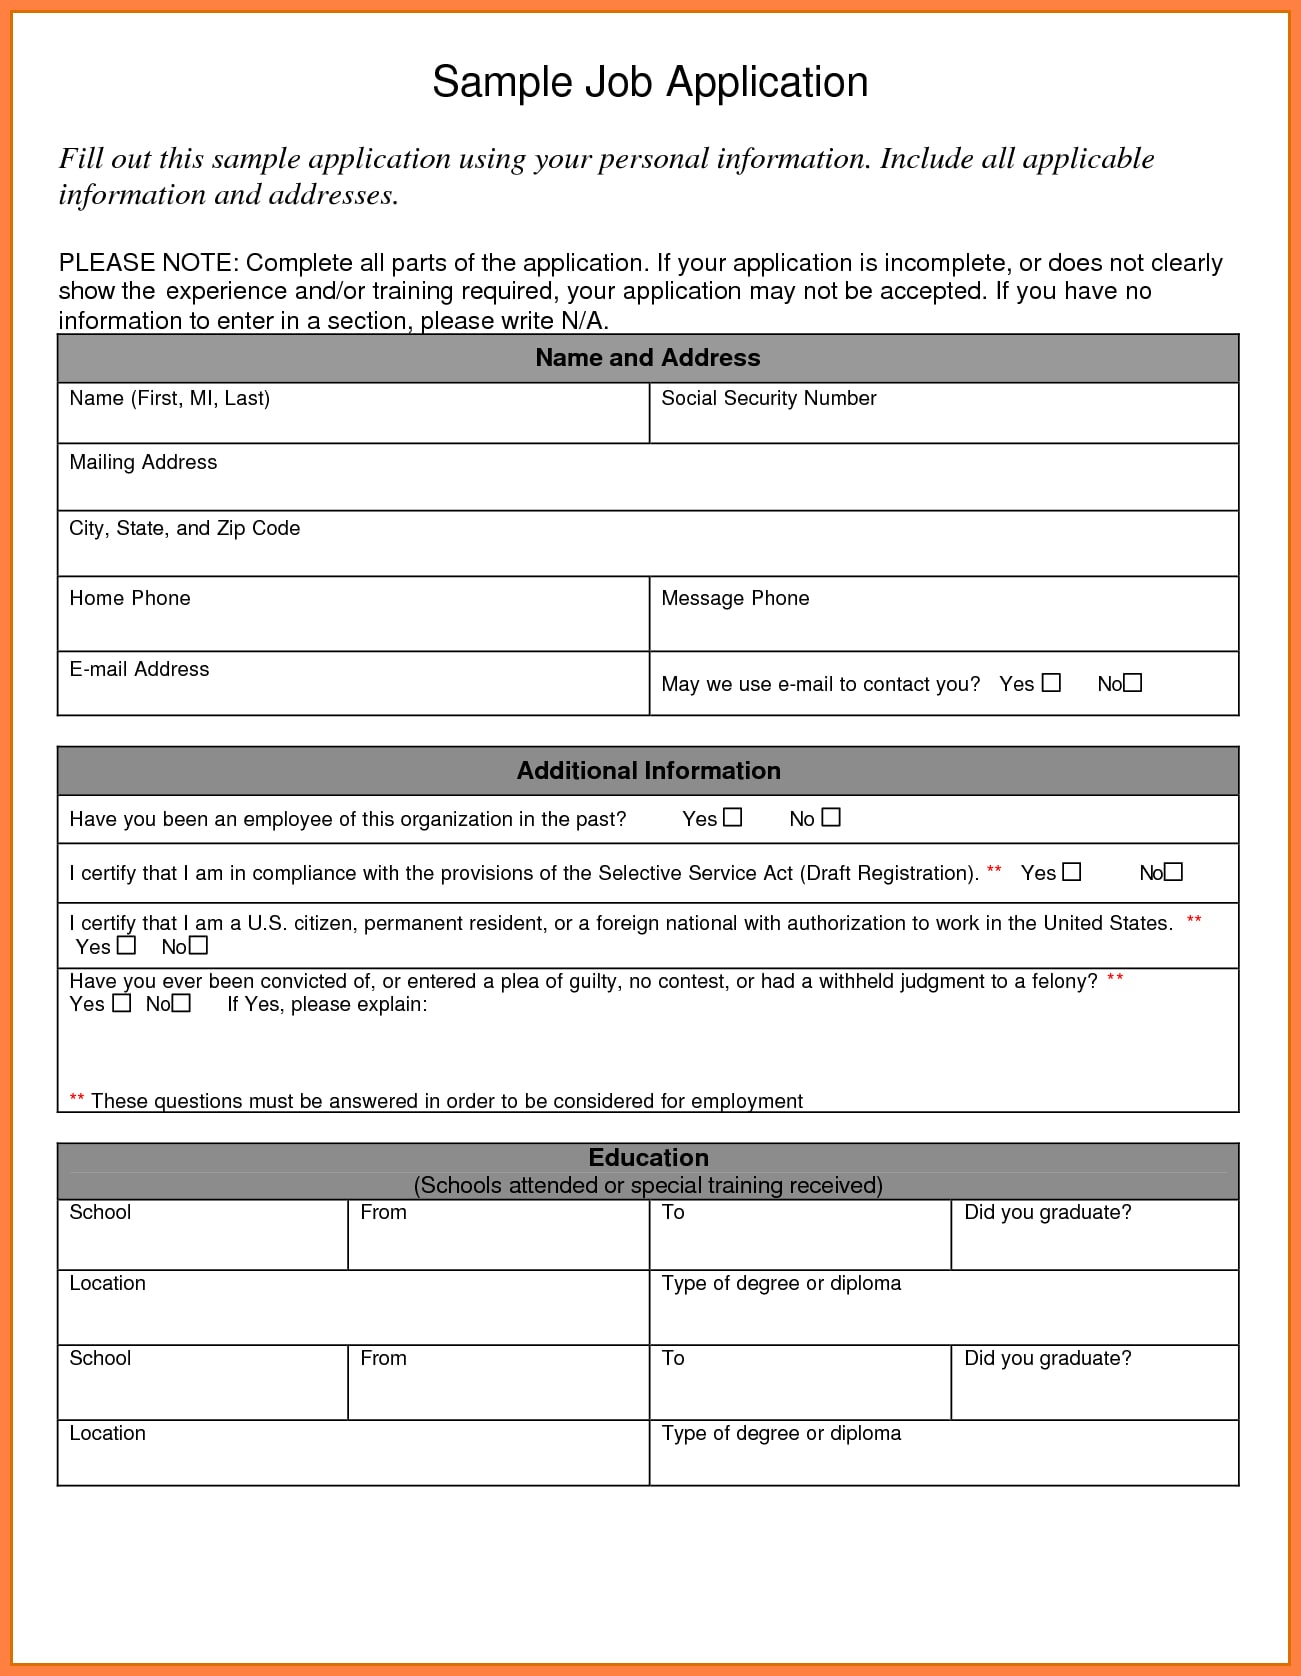 Job application form example answers